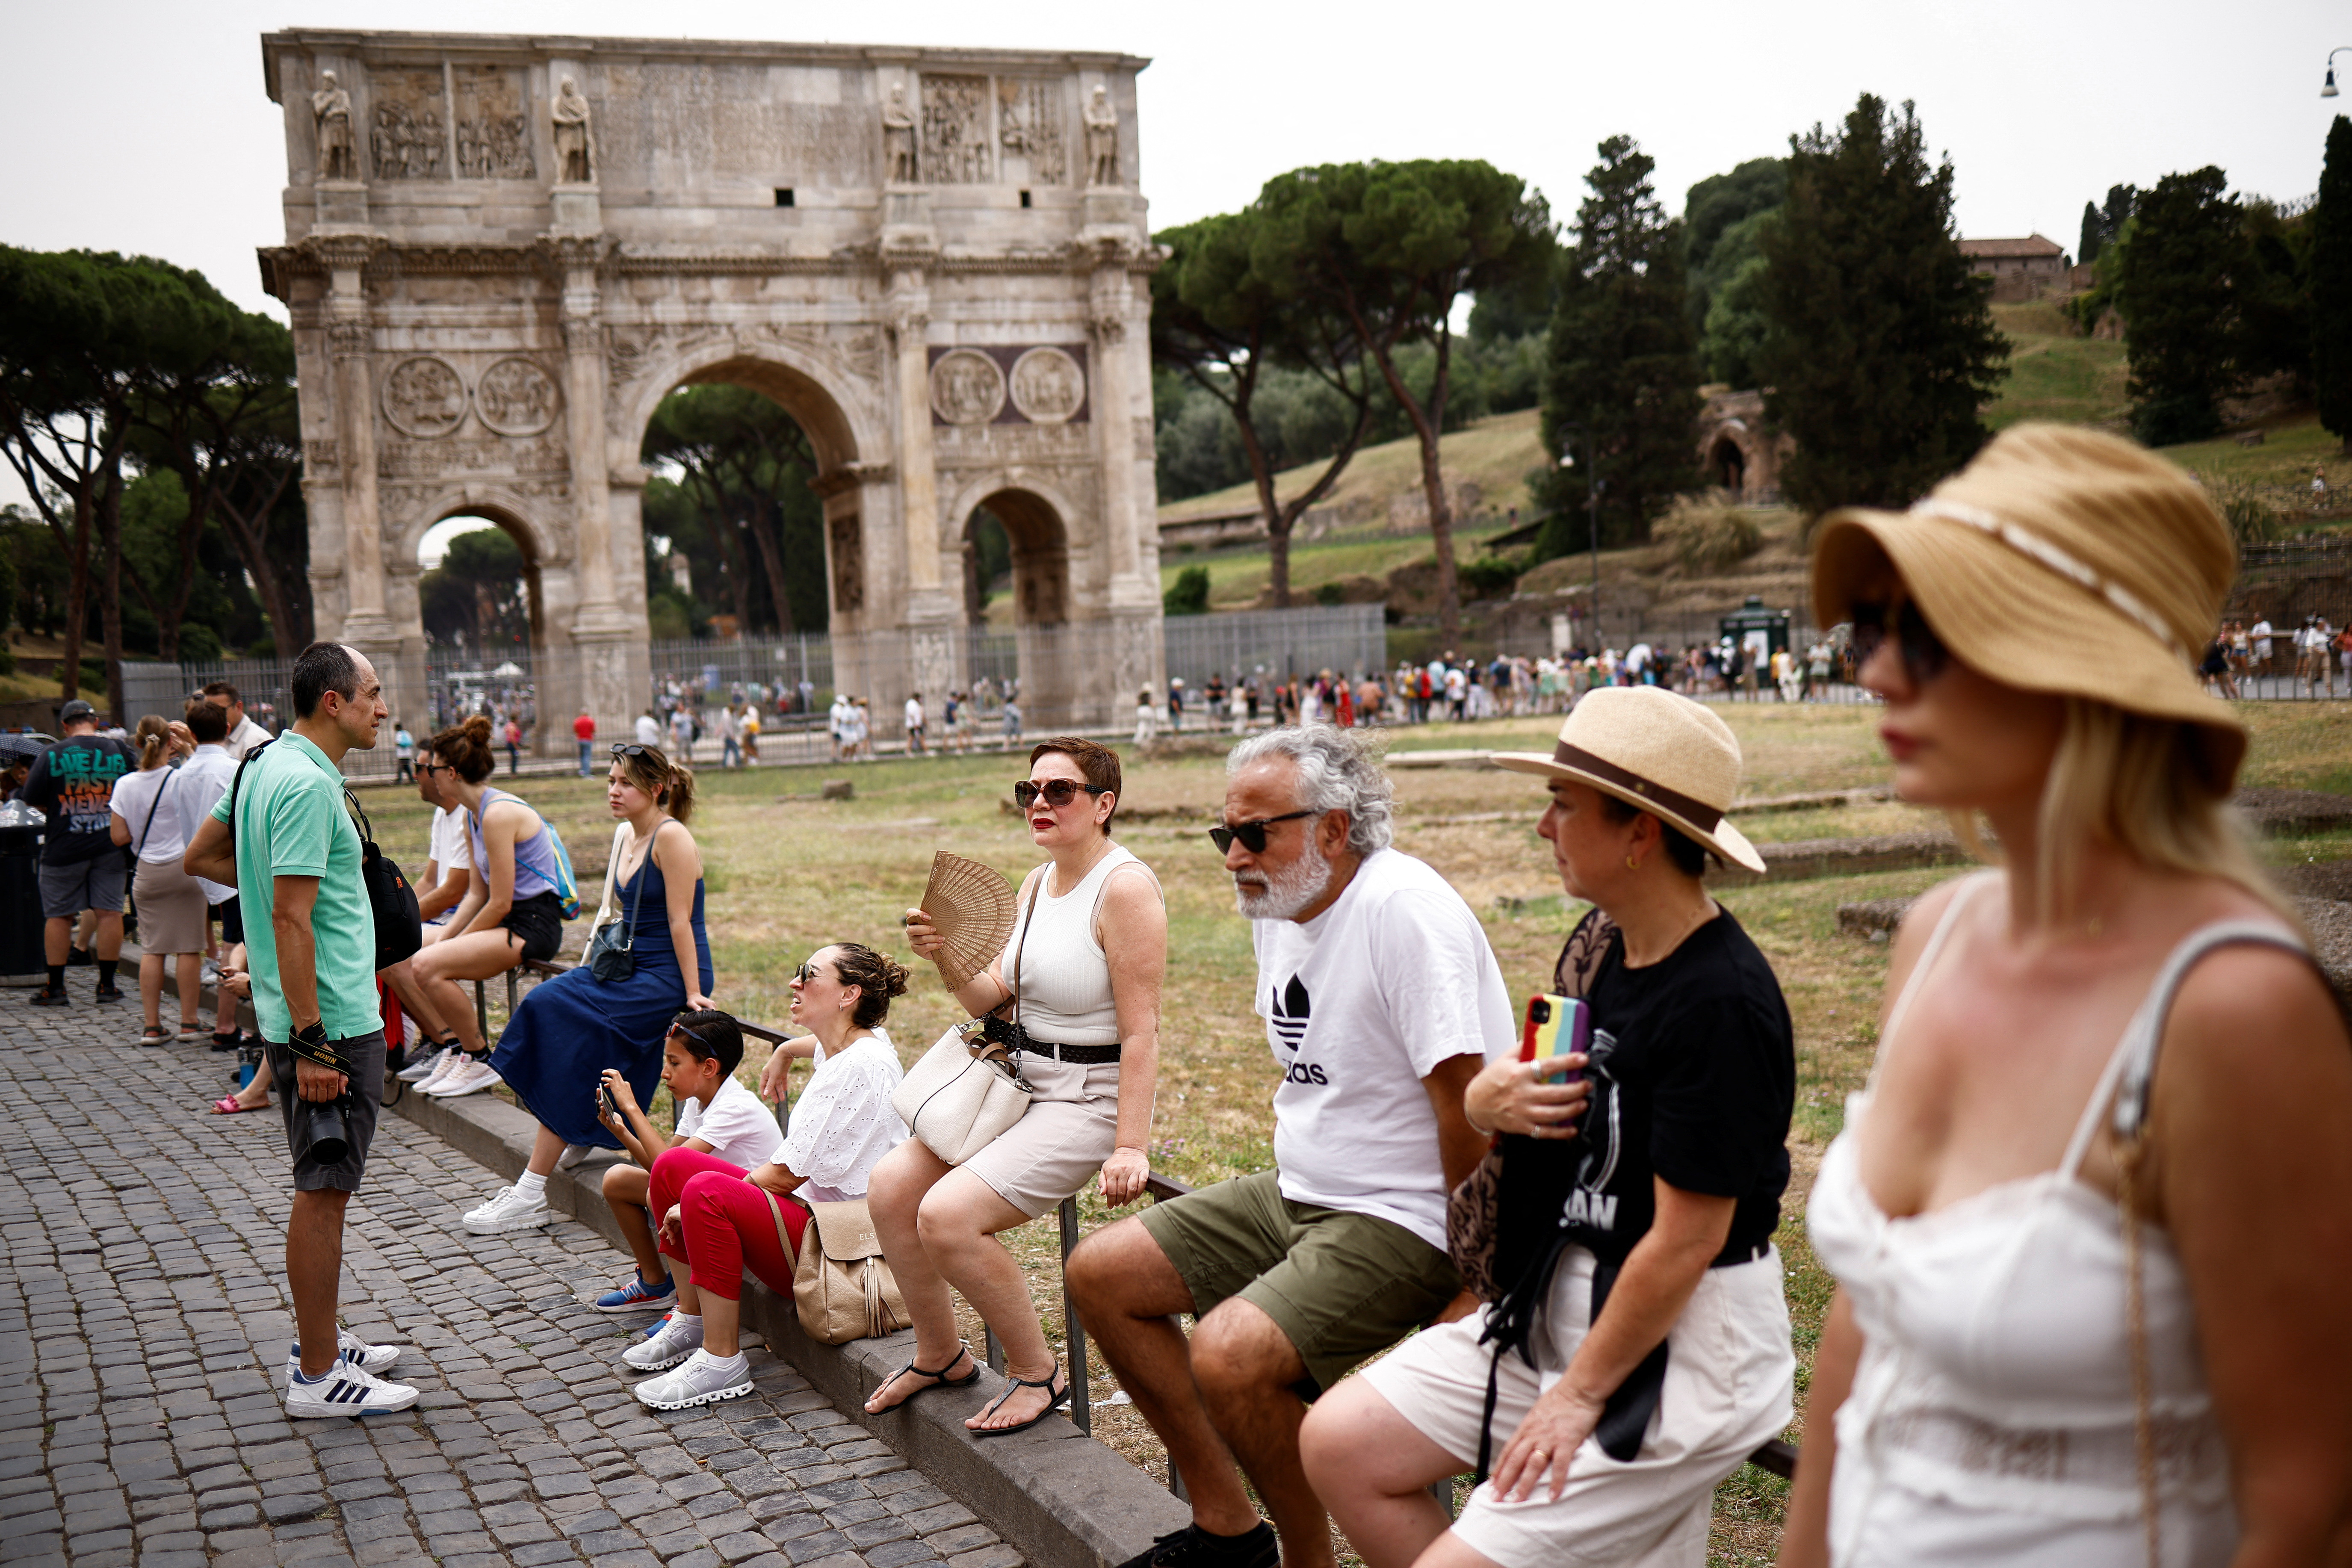 Tourists struggle with rising temperatures amidst heatwave in Rome